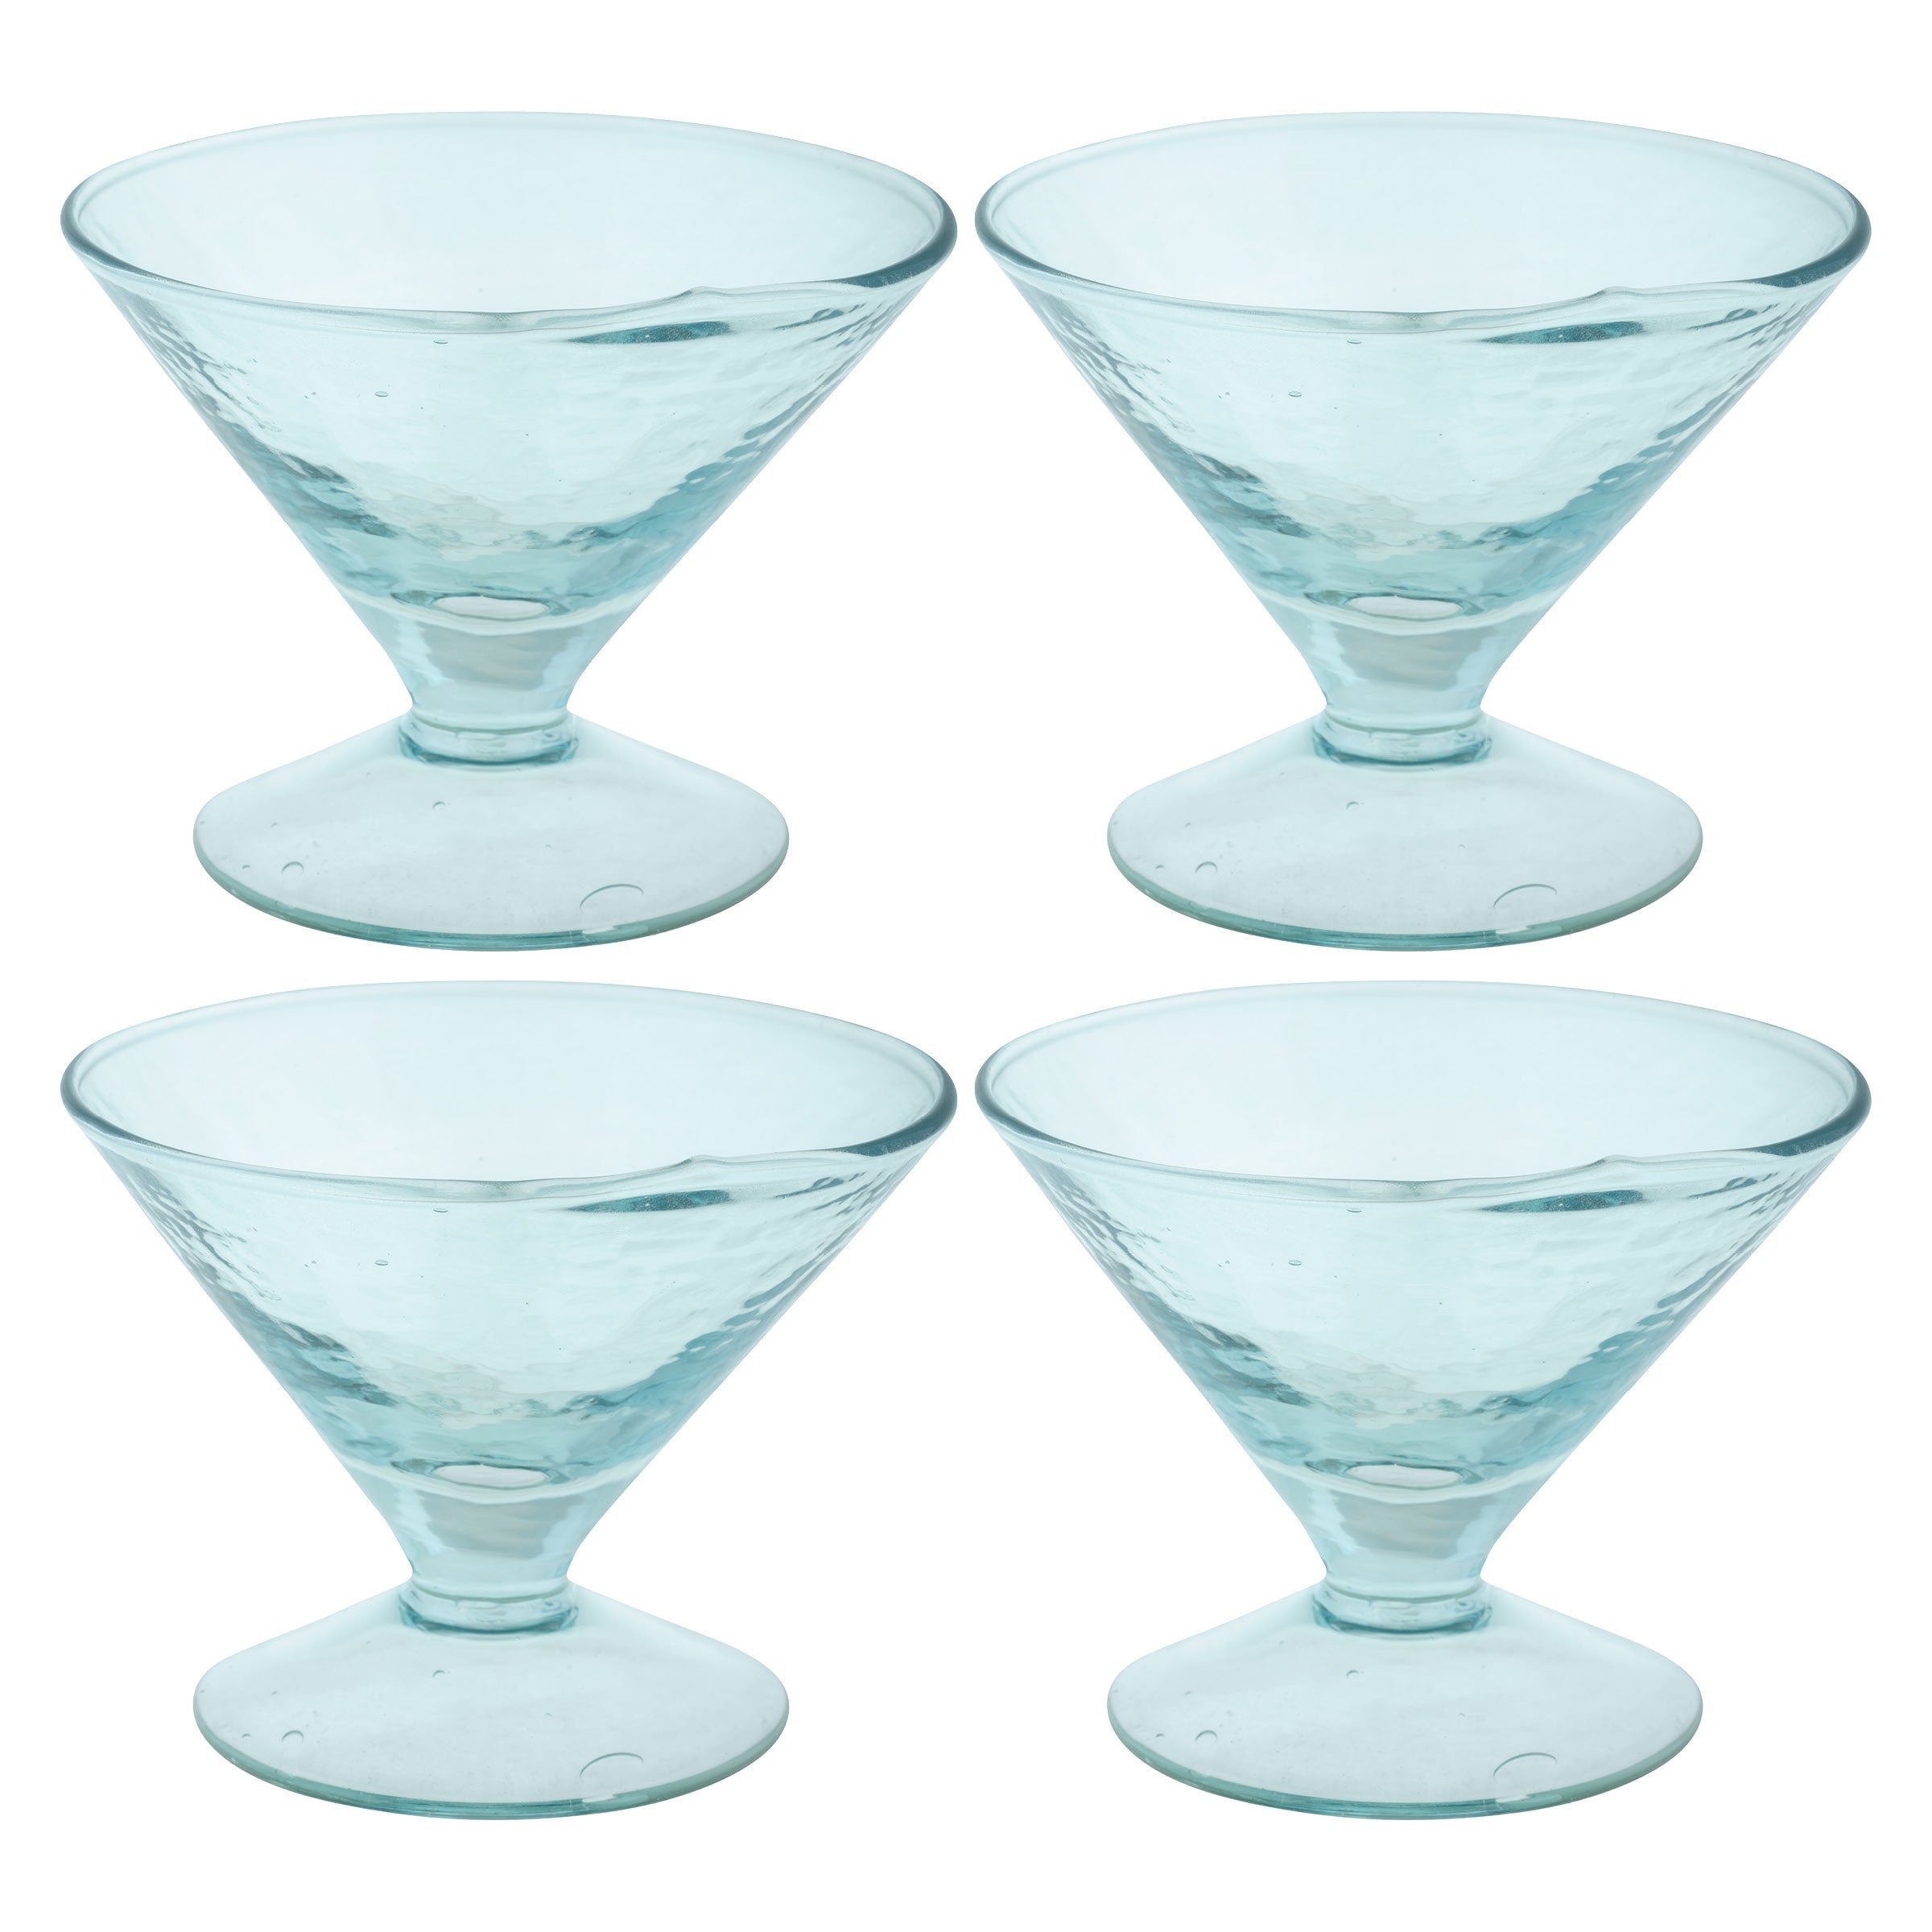 44445 - Short Martini Glass in Teal (4) - $16/each- Purchased